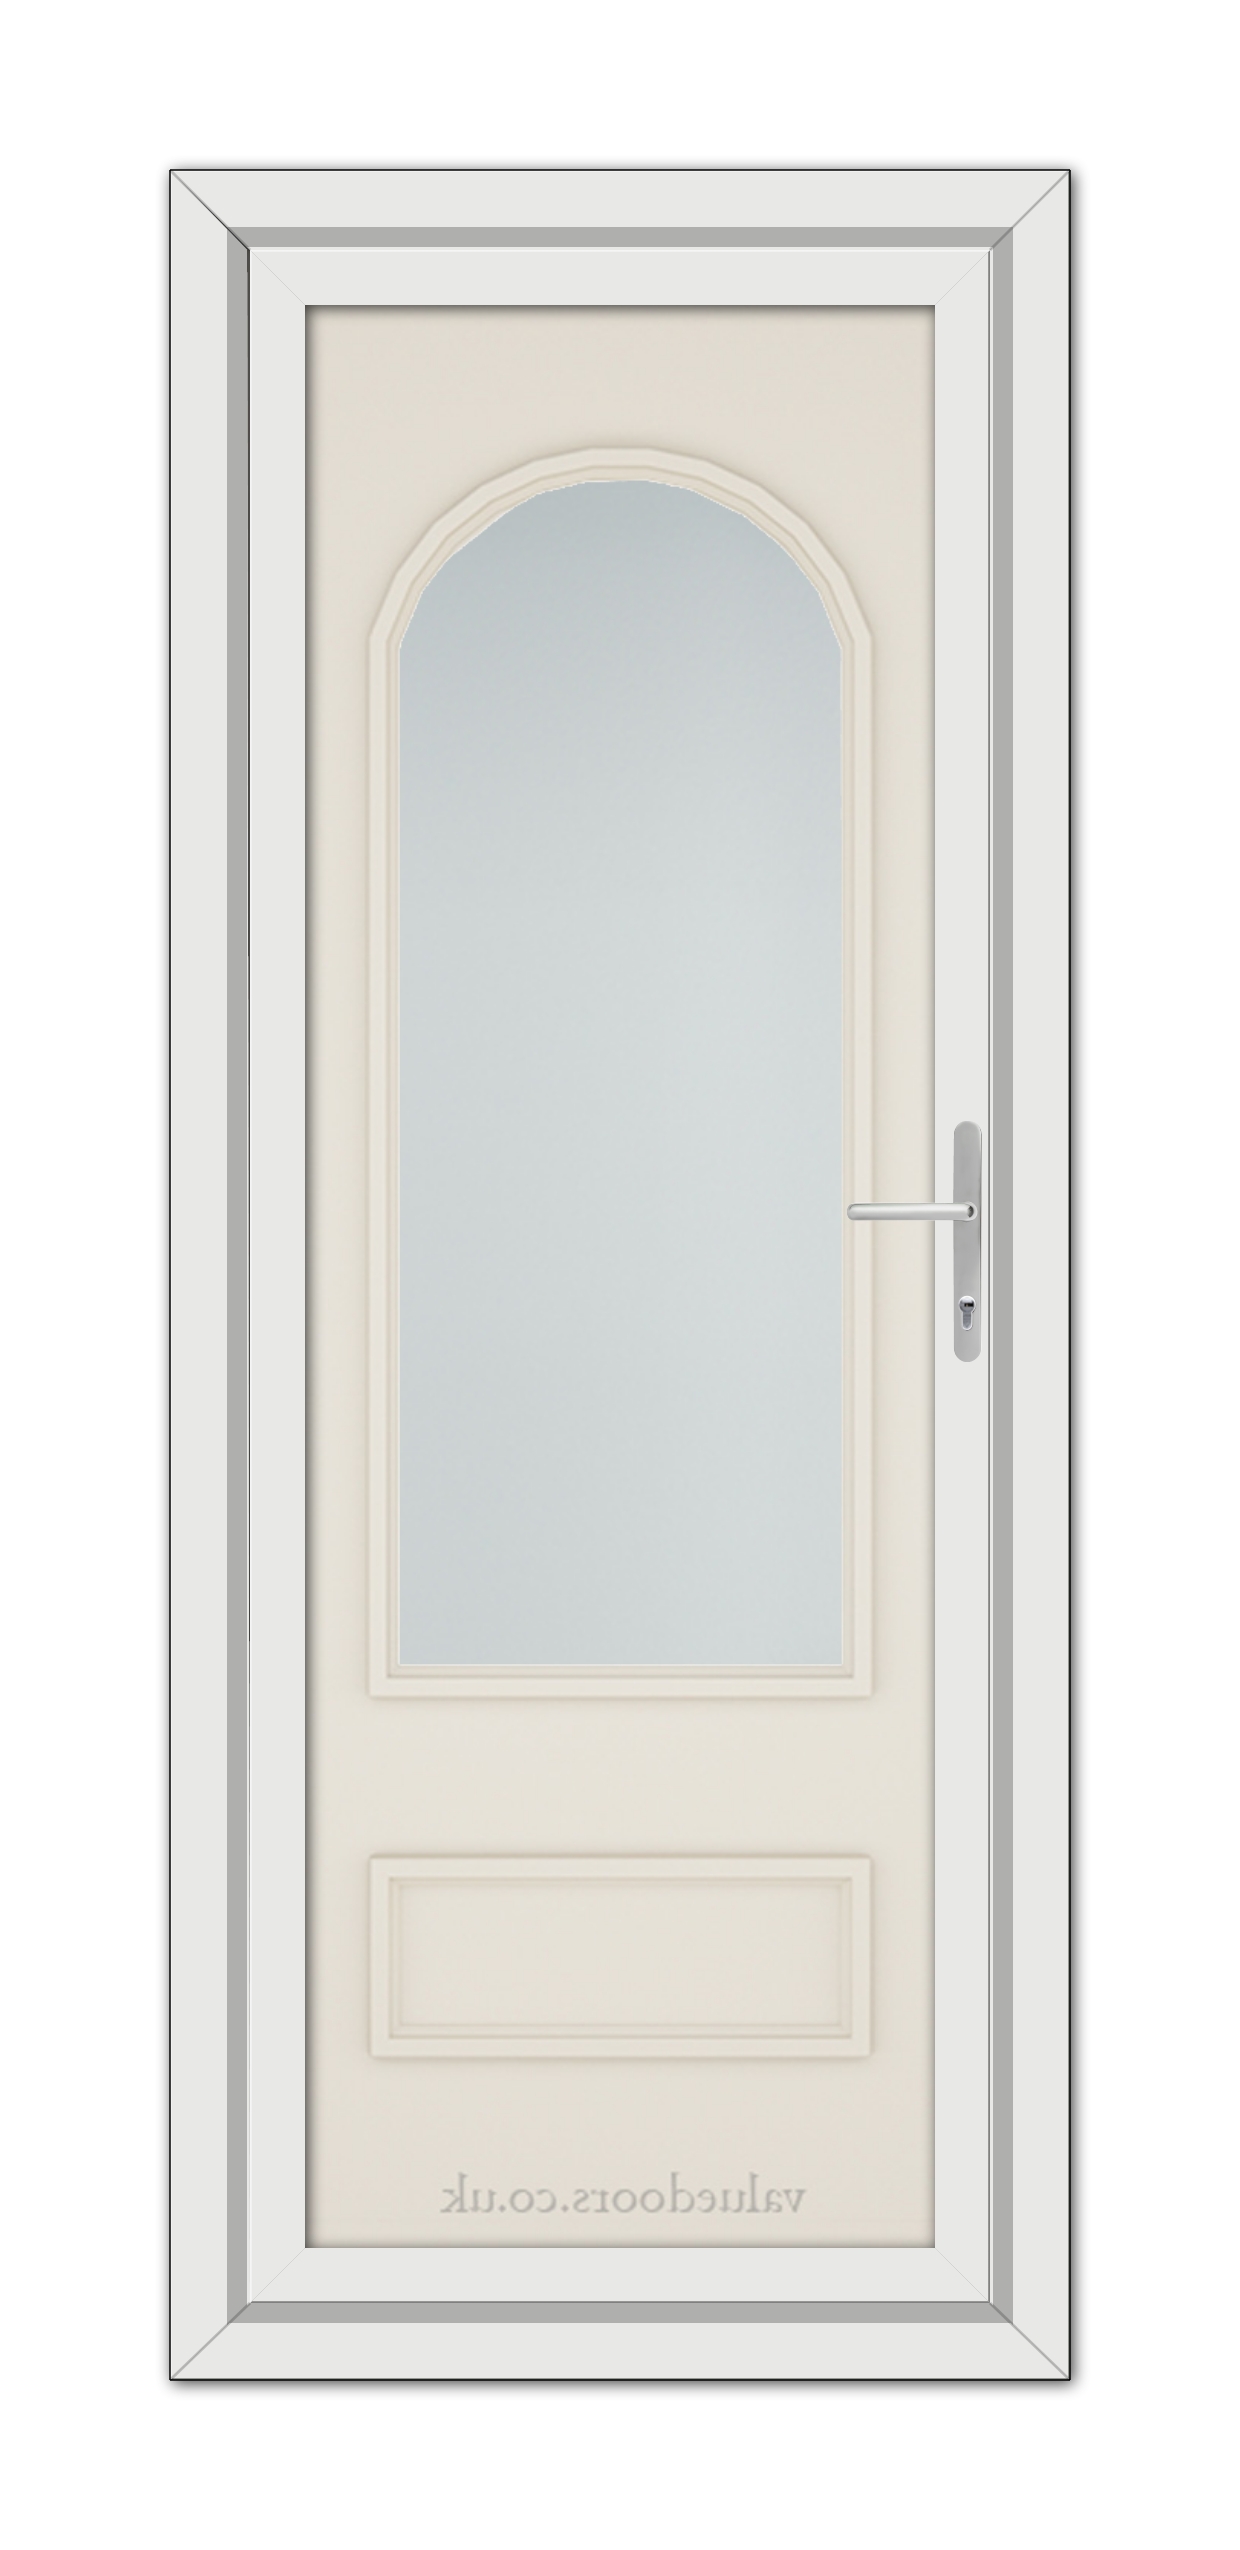 A Cream Canterbury uPVC Door with a vertical, arched window set into it, featuring a sleek, silver handle on the right side.